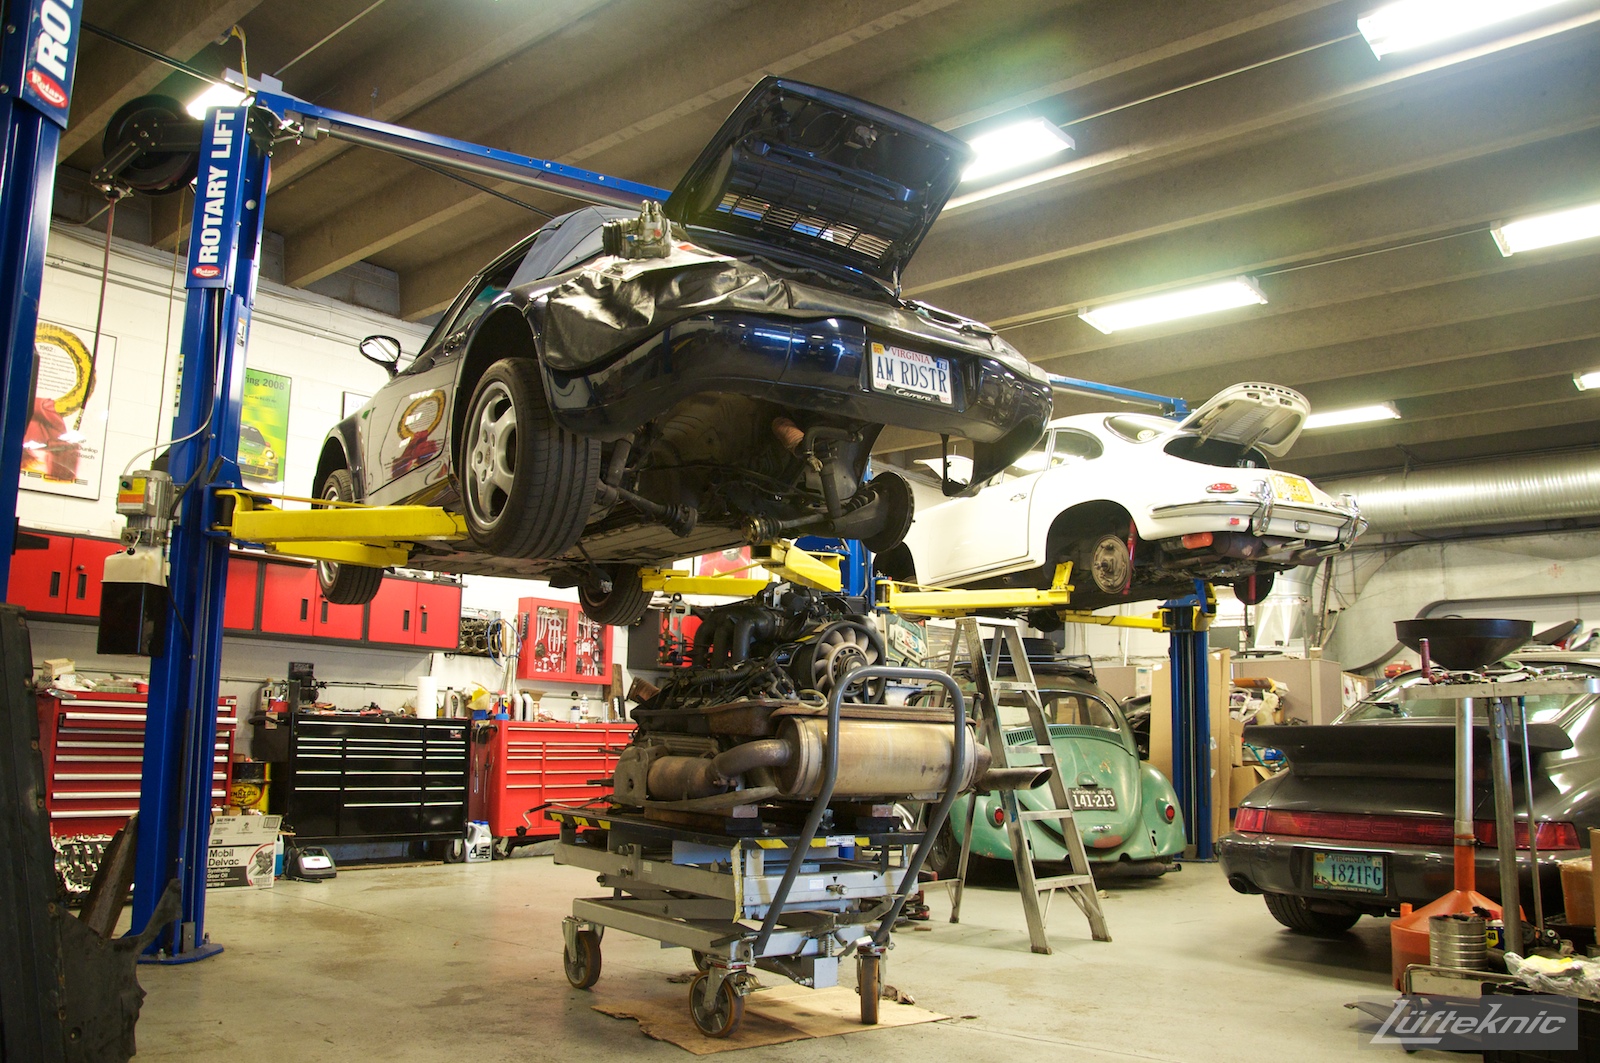 A rare 964 American Roadster inside the Lufteknic shop with the engine and transmission being removed.